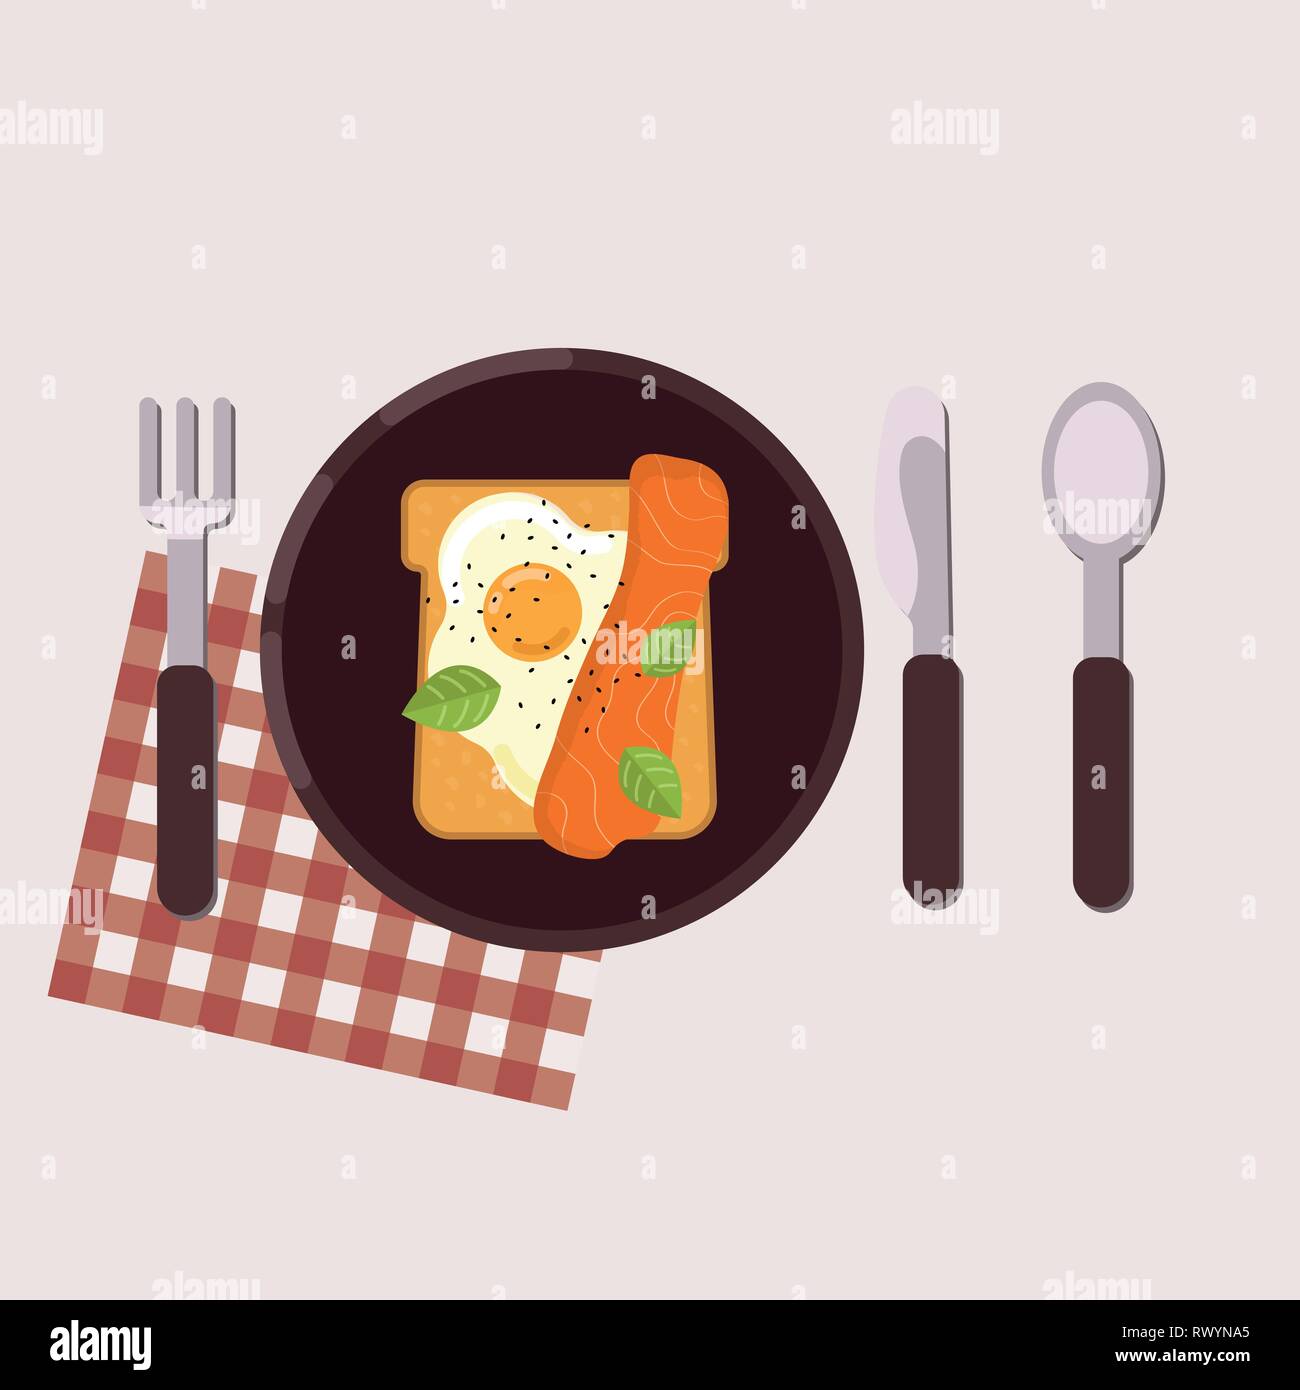 Toast with fried egg and smoked salmon served on a plate with fork, knife, spoon and napkin. Healthy food. Vector illustration. Stock Vector